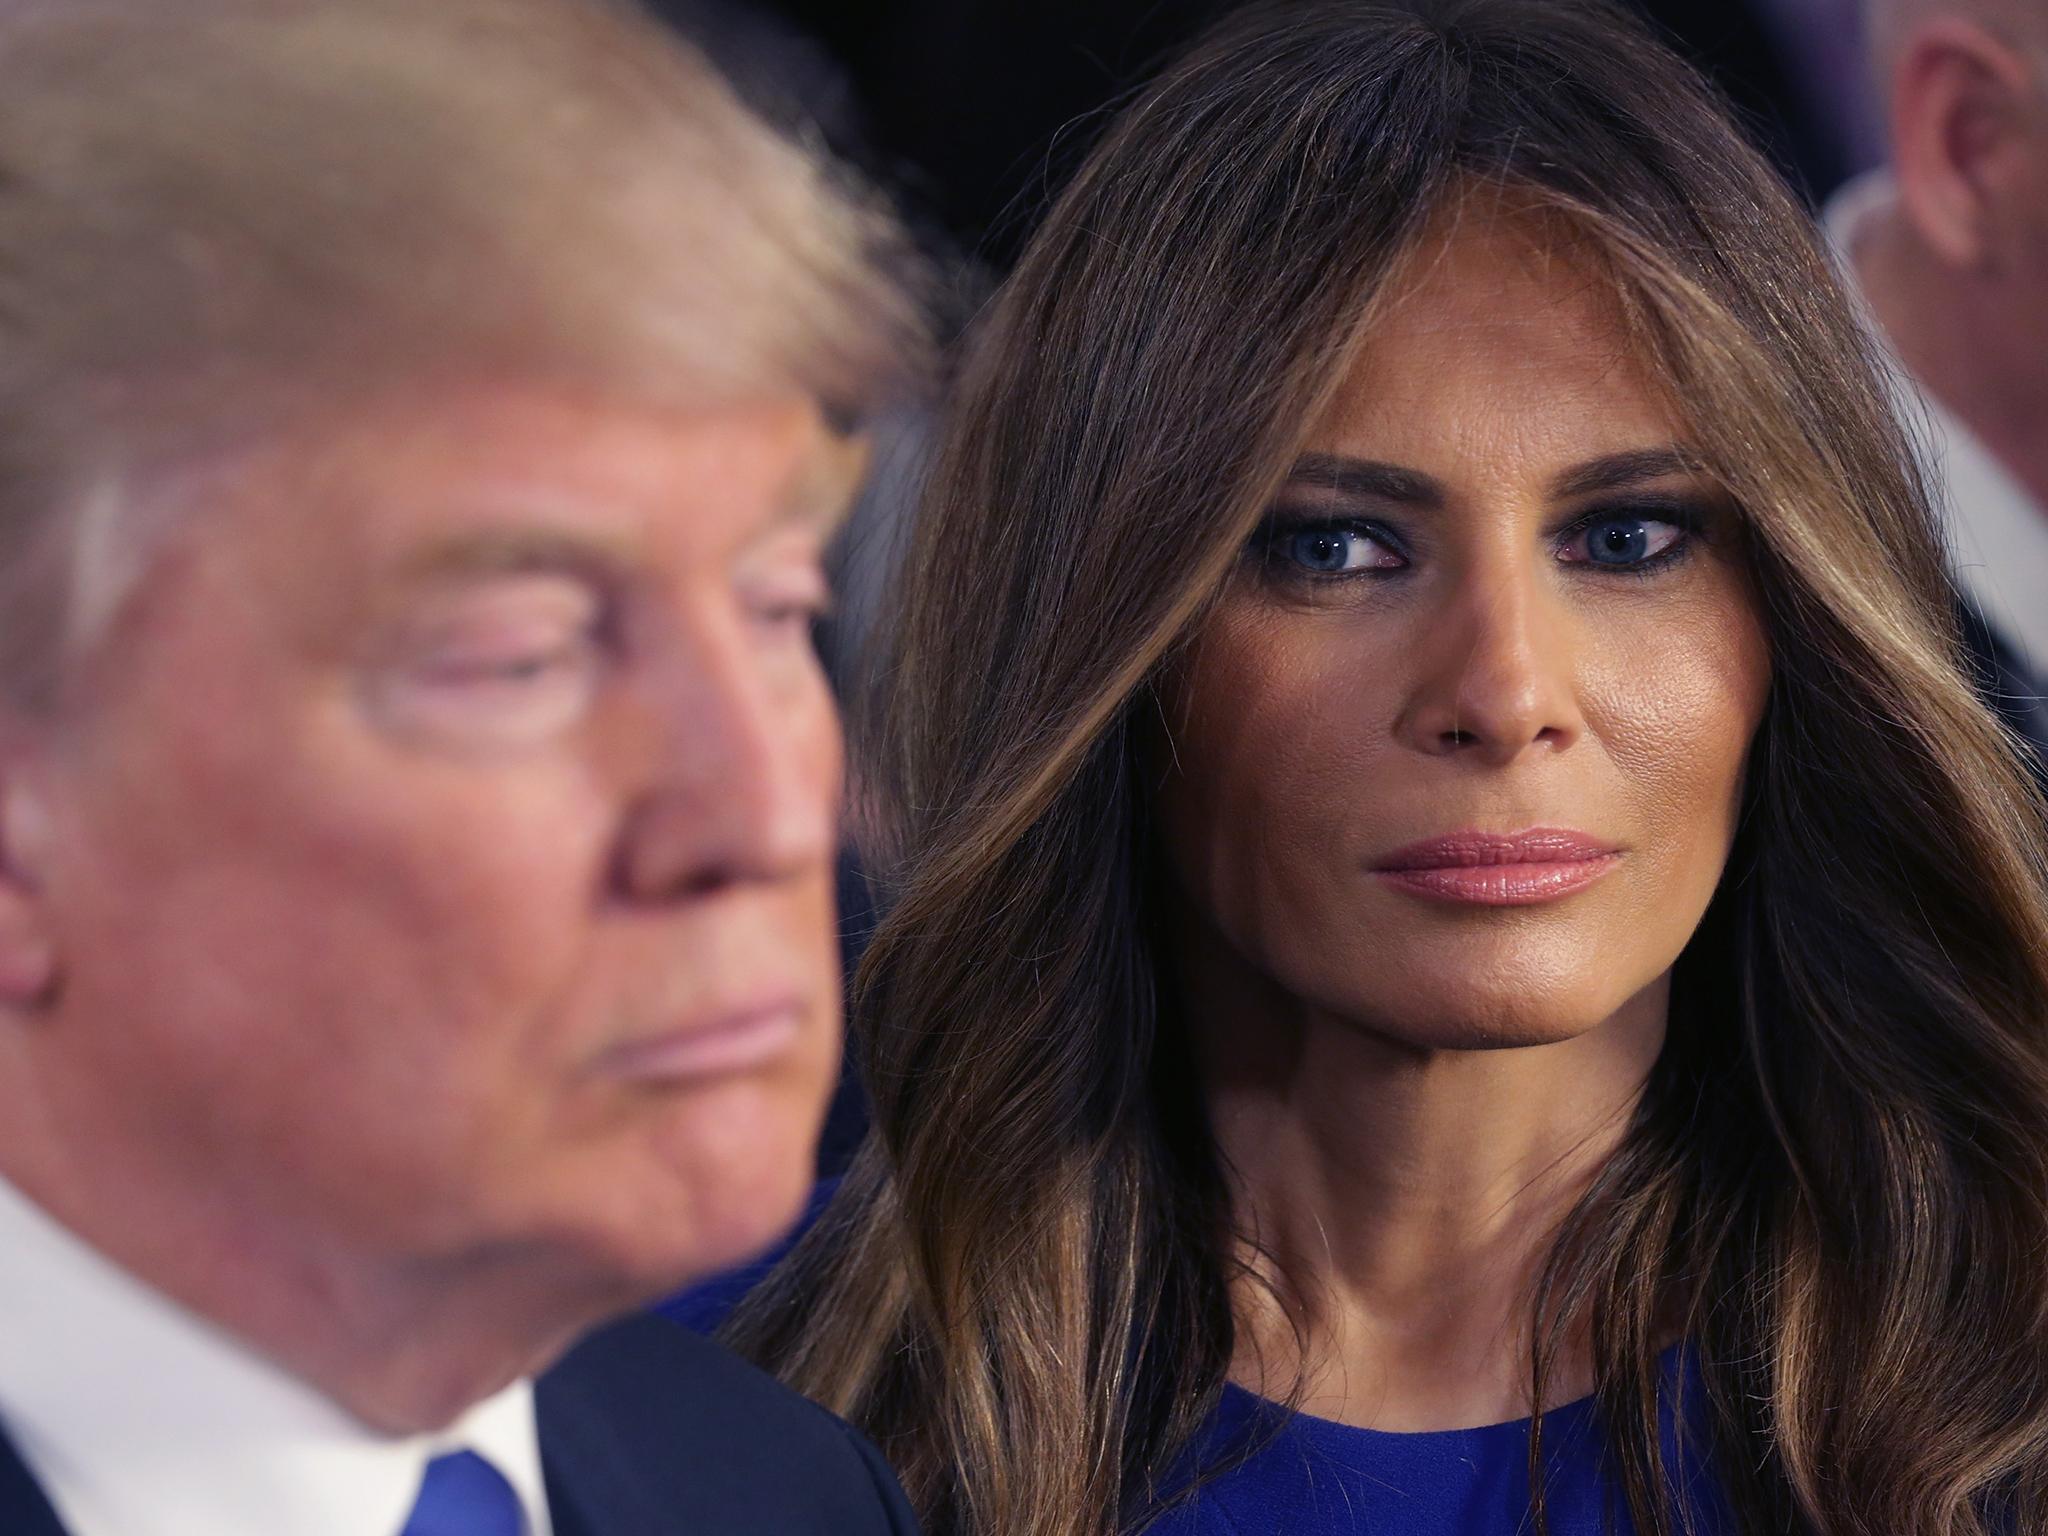 Michael Wildes defended Melania Trump from accusations she worked illegally, and is now battling her husband's attempts to block legal travel for certain American citizens